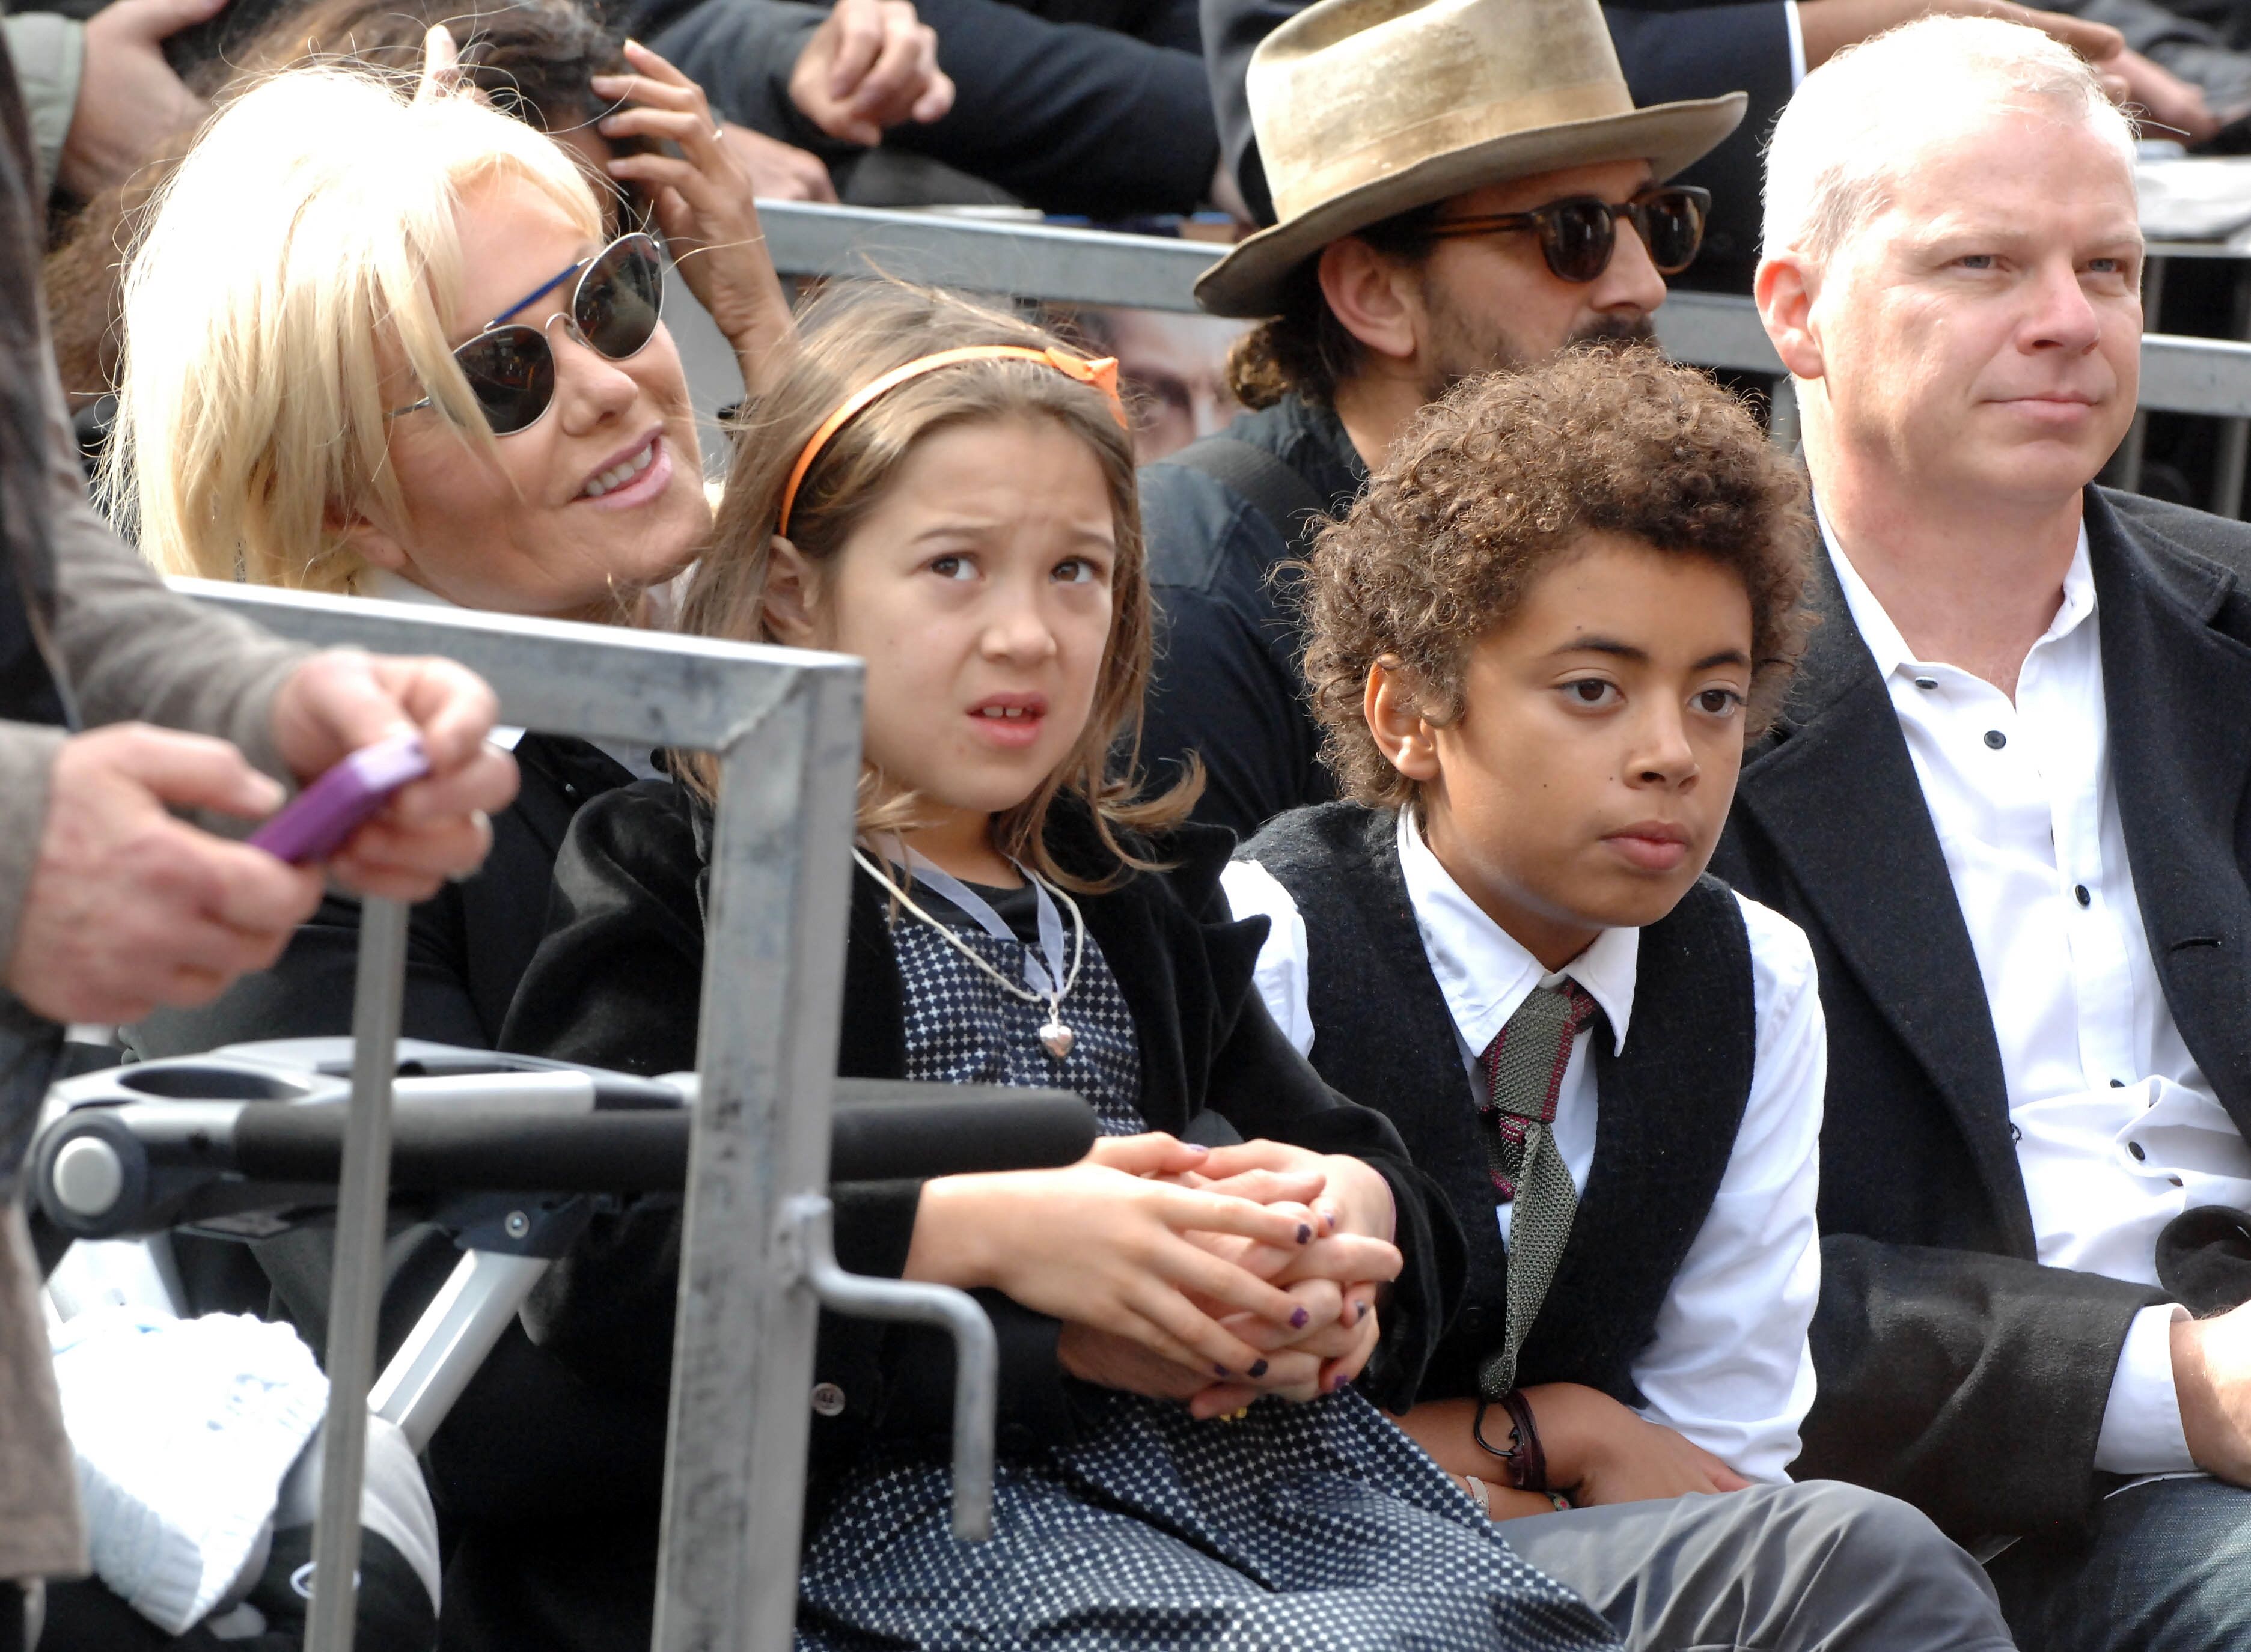 Deborra-Lee Furness and children Ava and Oscar participate in the Hugh Jackman Star ceremony at The Hollywood Walk Of Fame. | Source: Getty Images